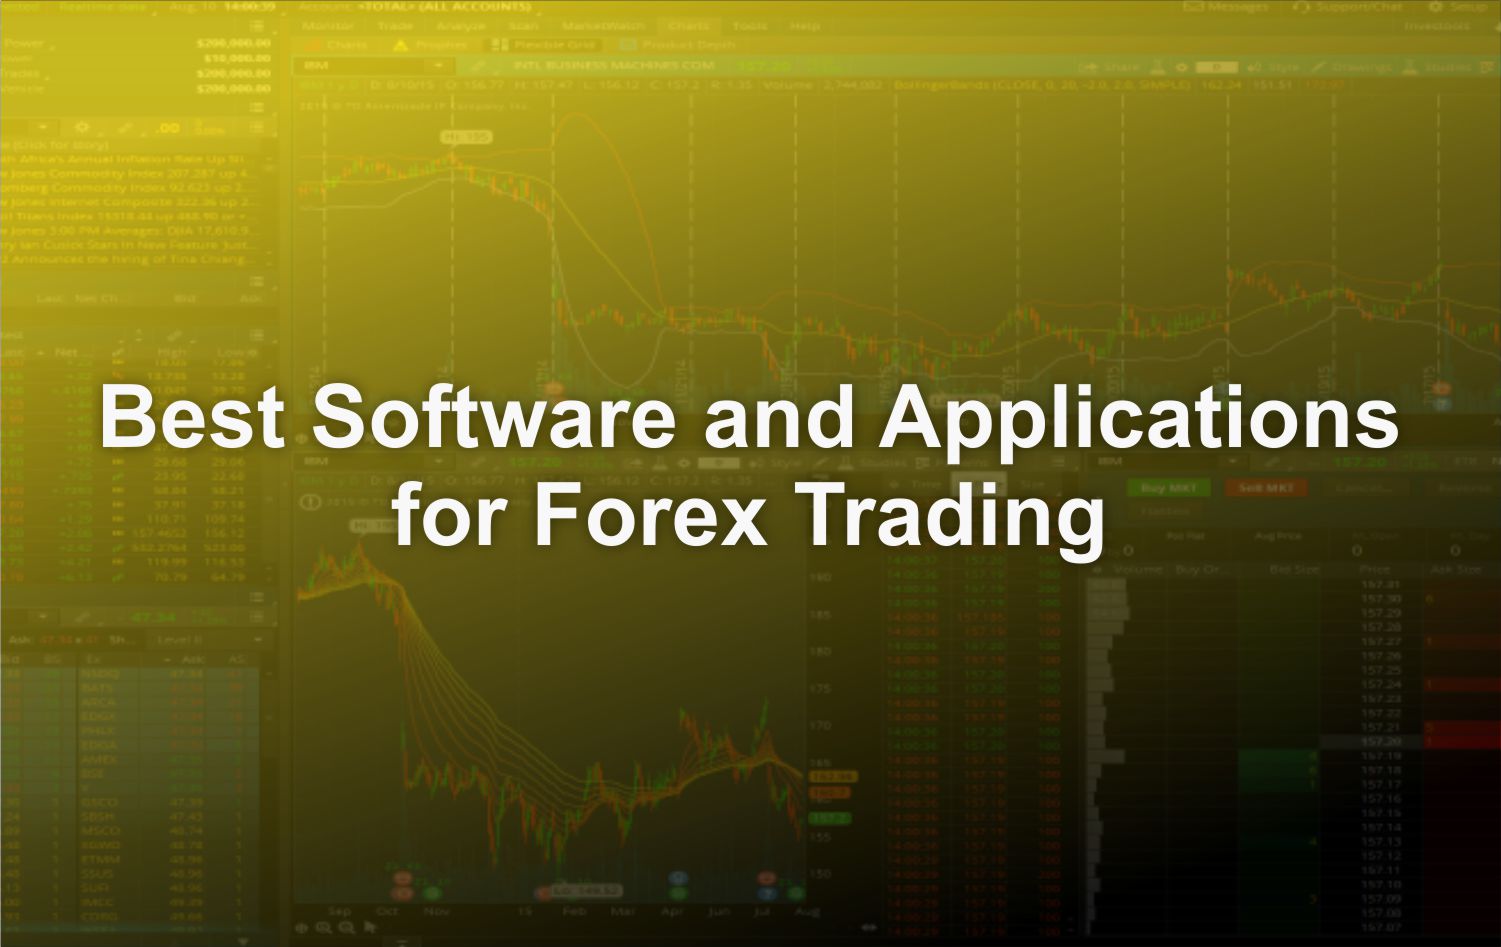 5 Best Software and Applications for Forex Trading